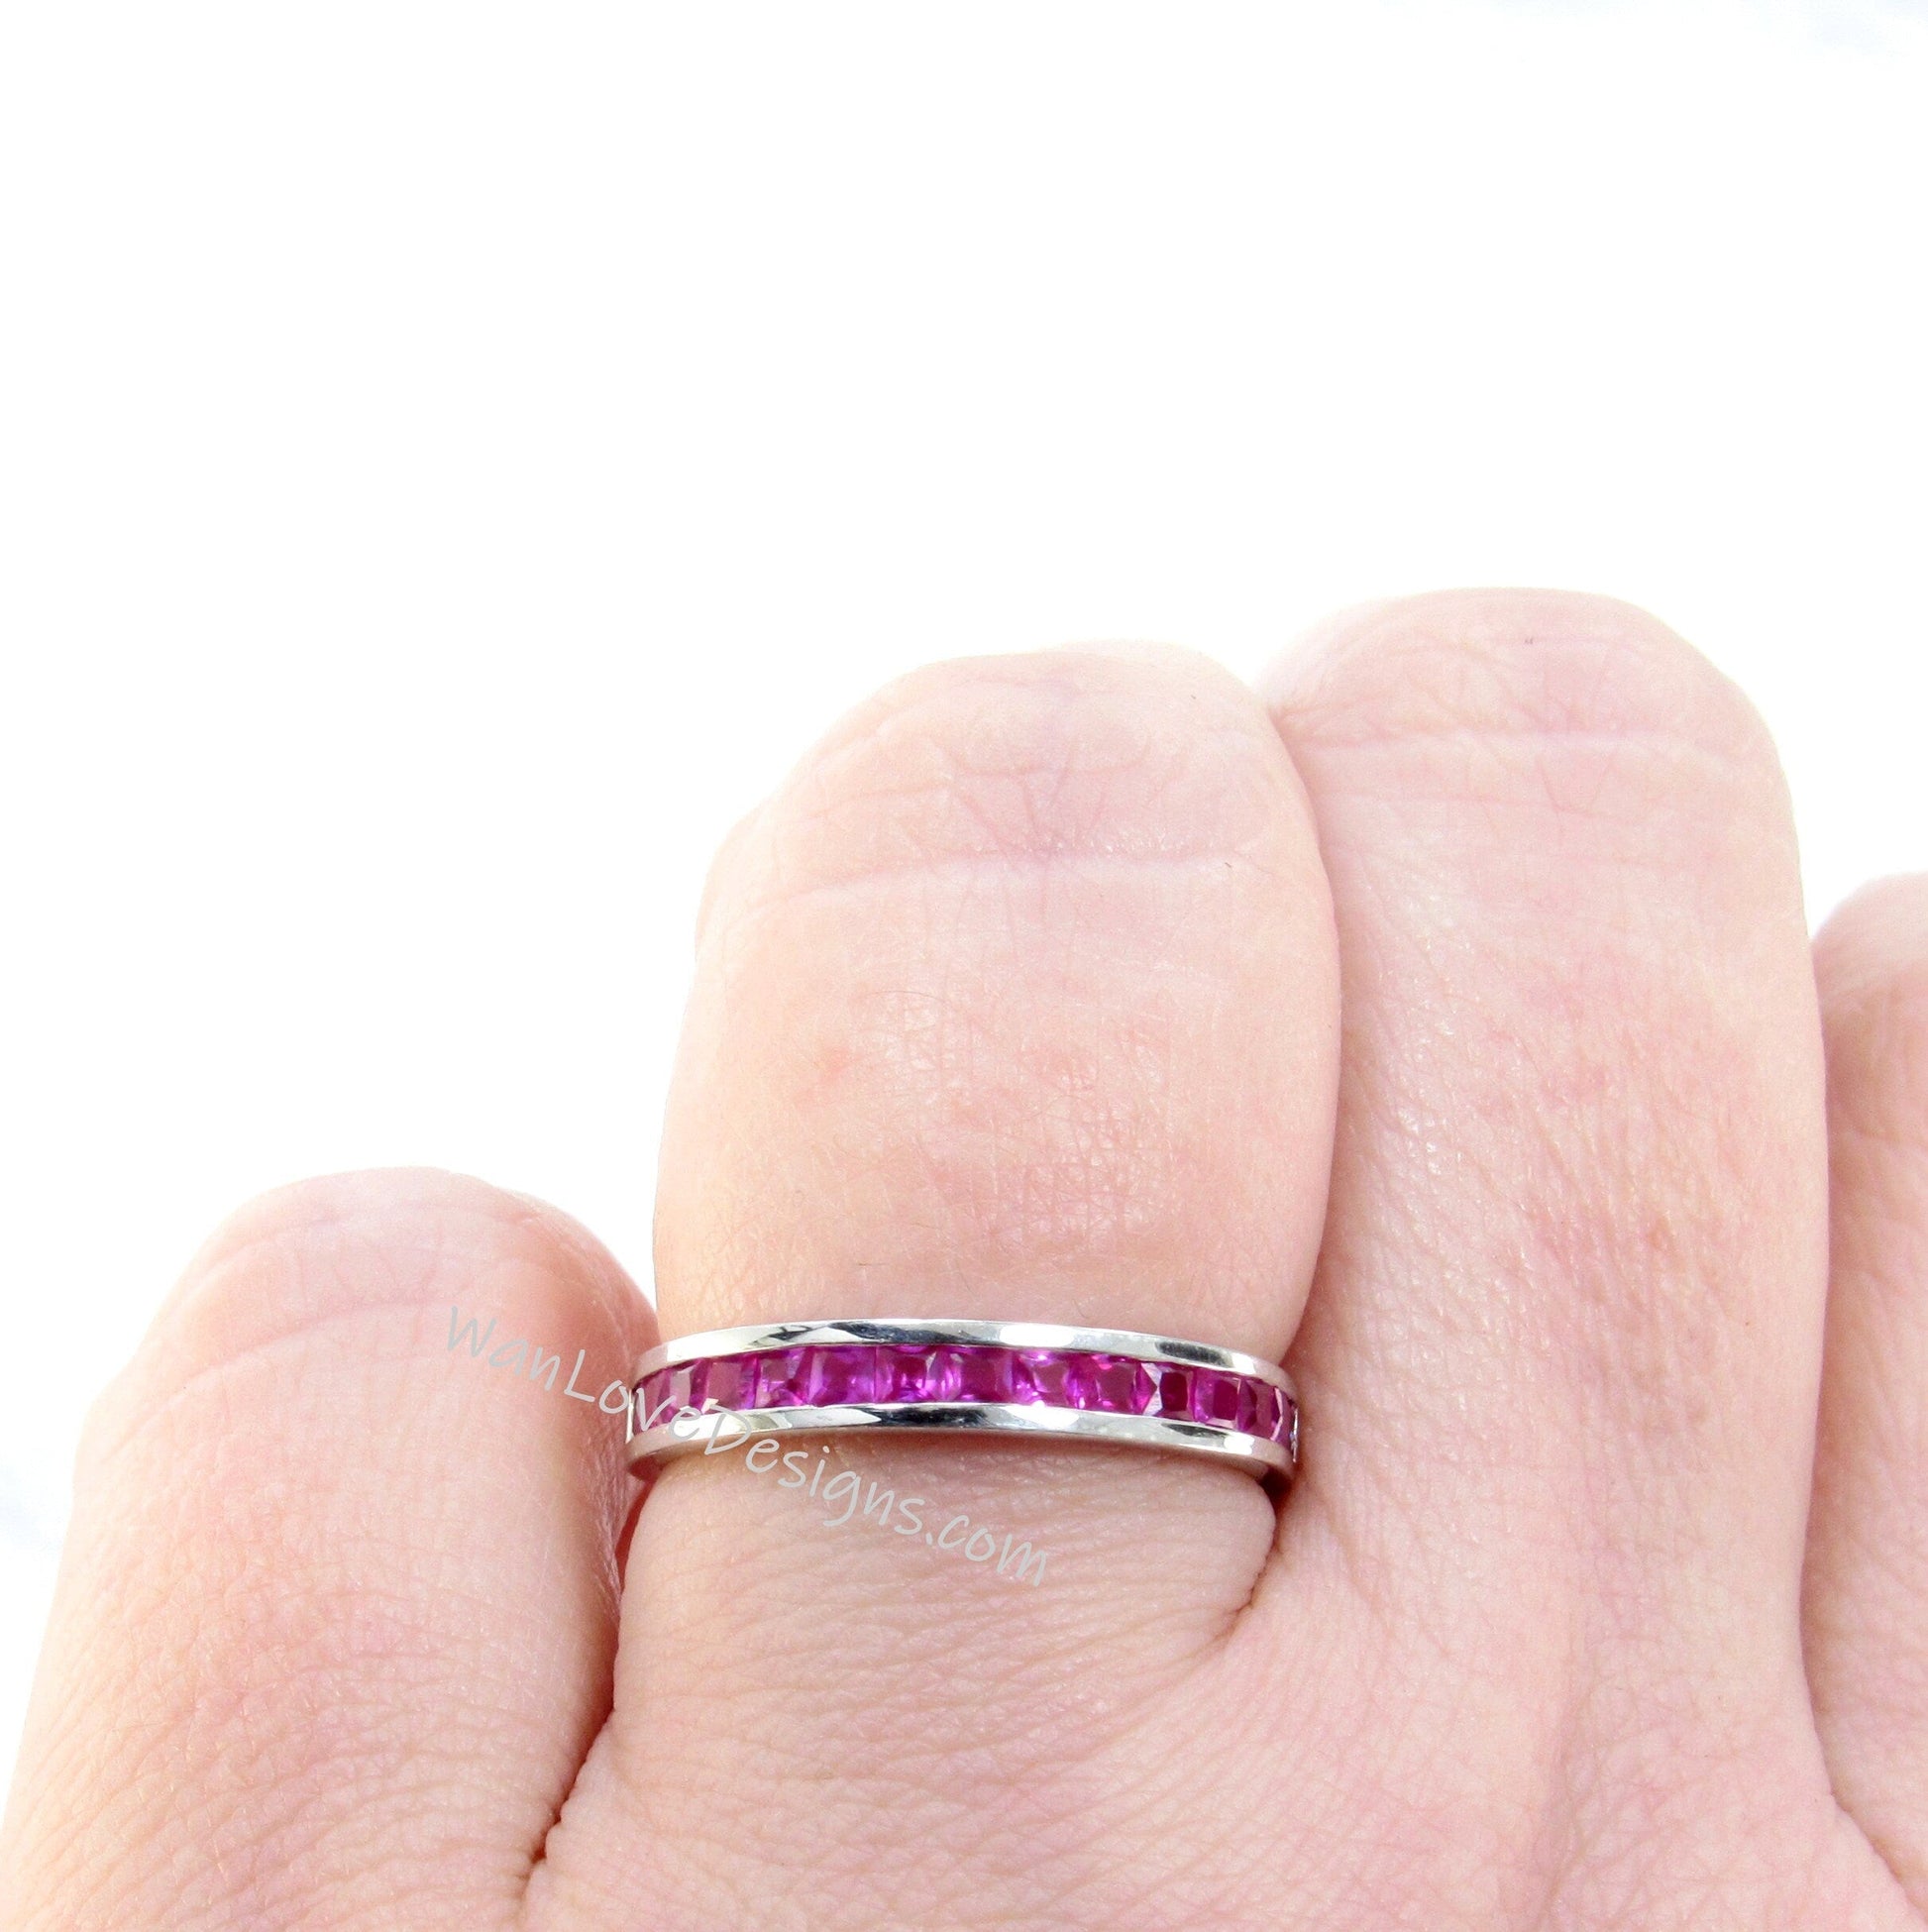 Sample Sale Ready to ship-Ruby Princess Half Eternity Channel Set Wedding Band, Stackable Ring, 925 Silver Rhodium, Anniversary Gift Wan Love Designs